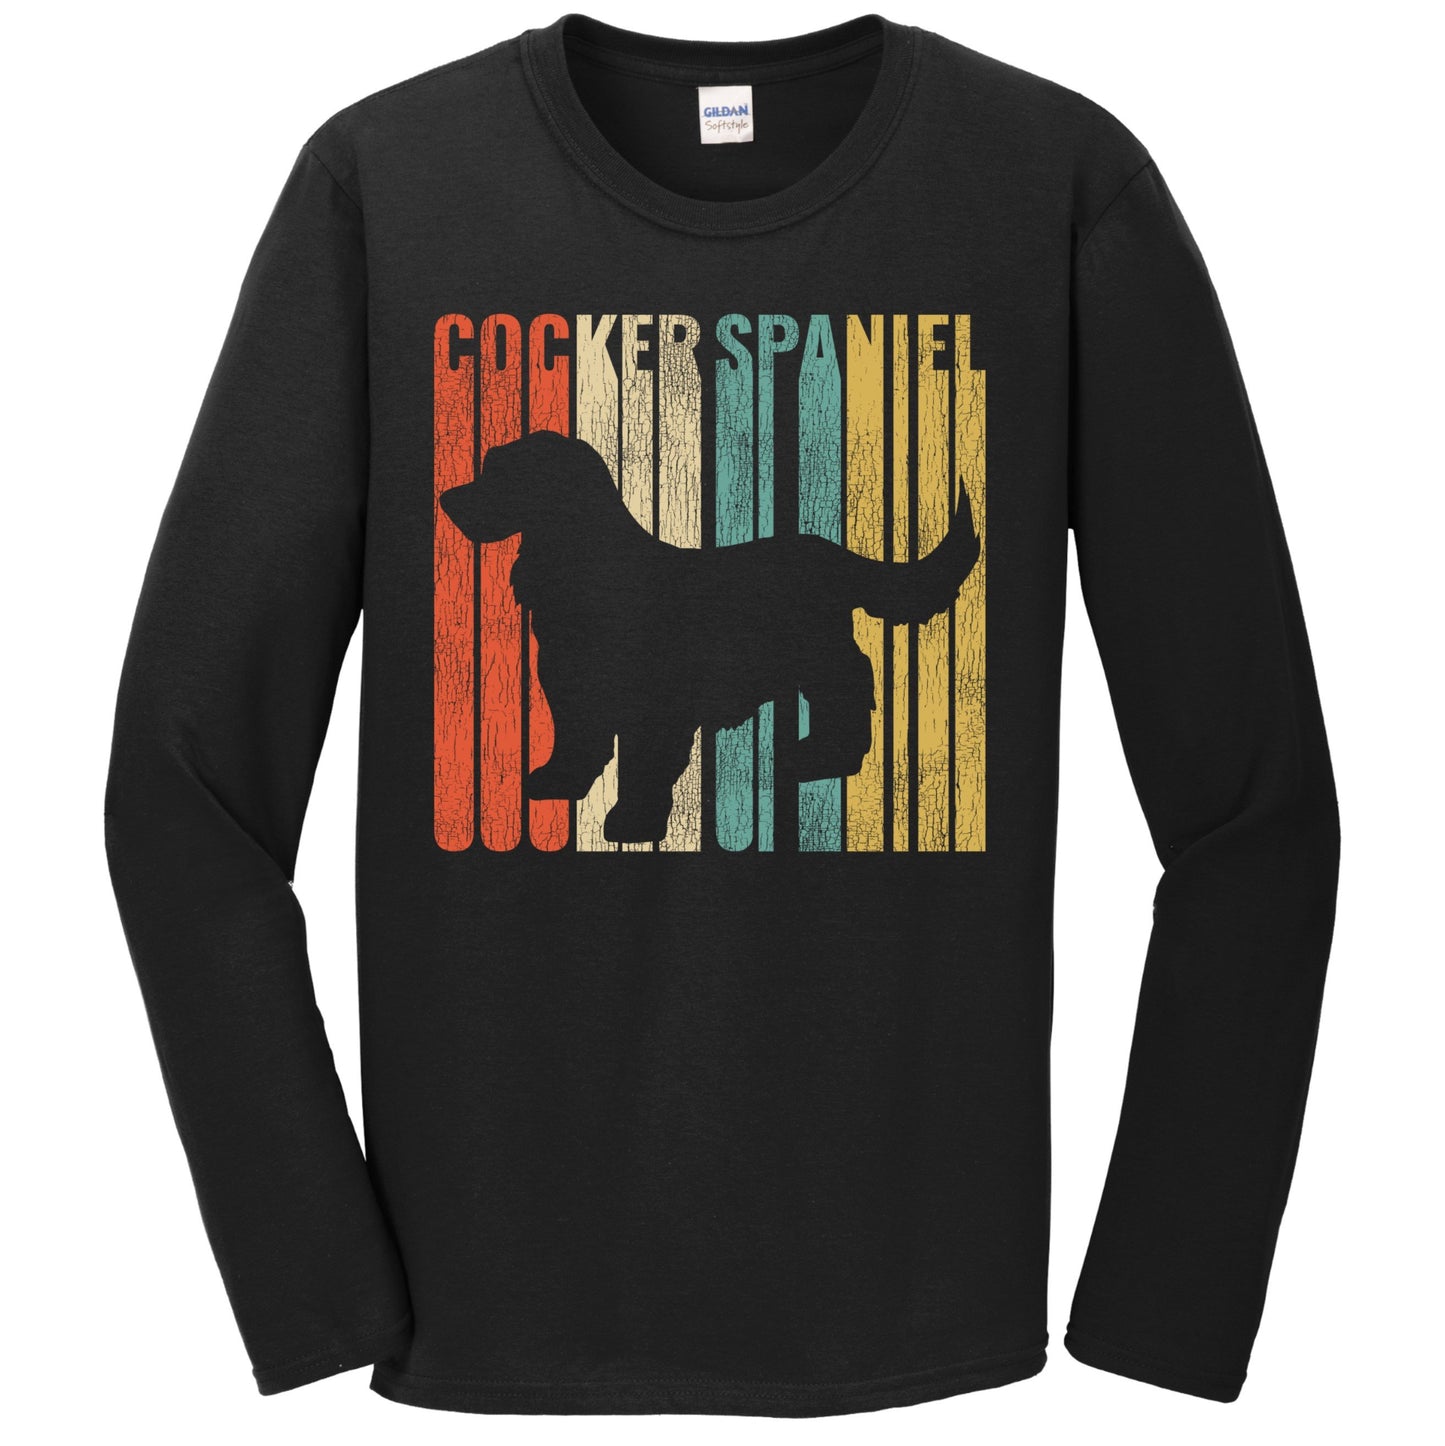 Retro 1970's Style Cocker Spaniel Dog Silhouette Cracked Distressed Long Sleeve T-Shirt